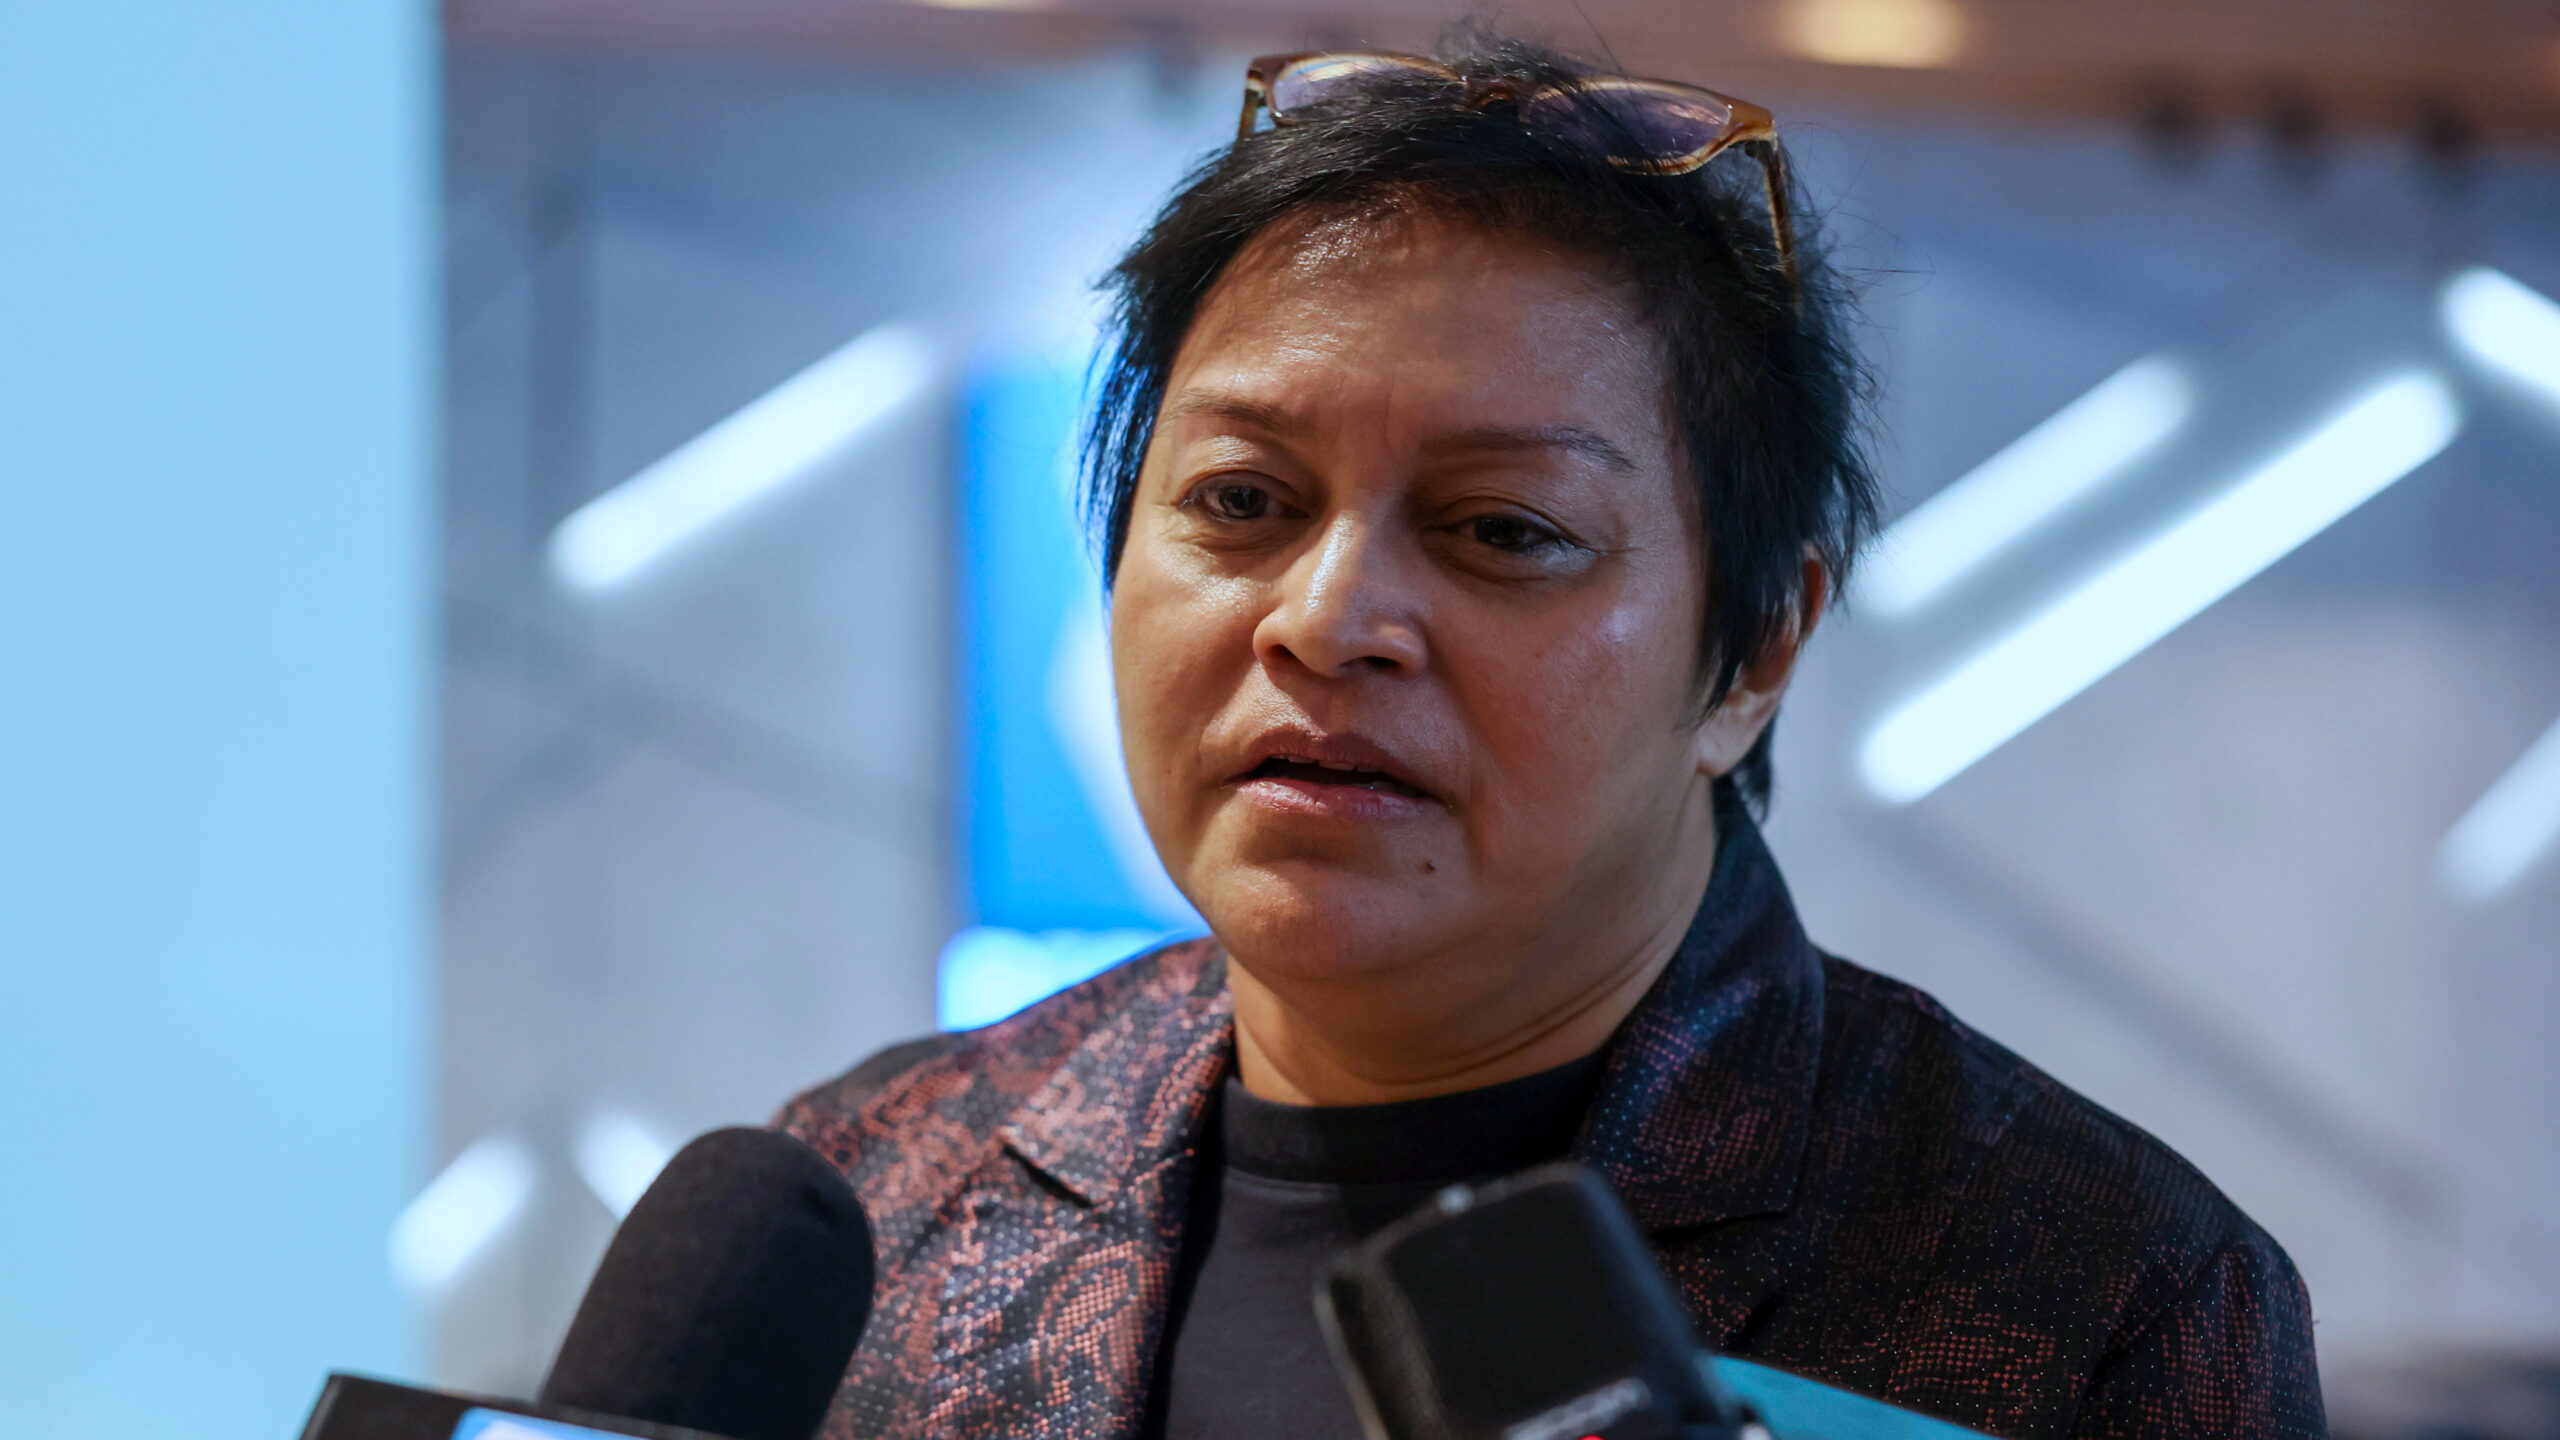 Online child sexual abuse offences include six categories, jail terms of 5 to 30 years: Azalina